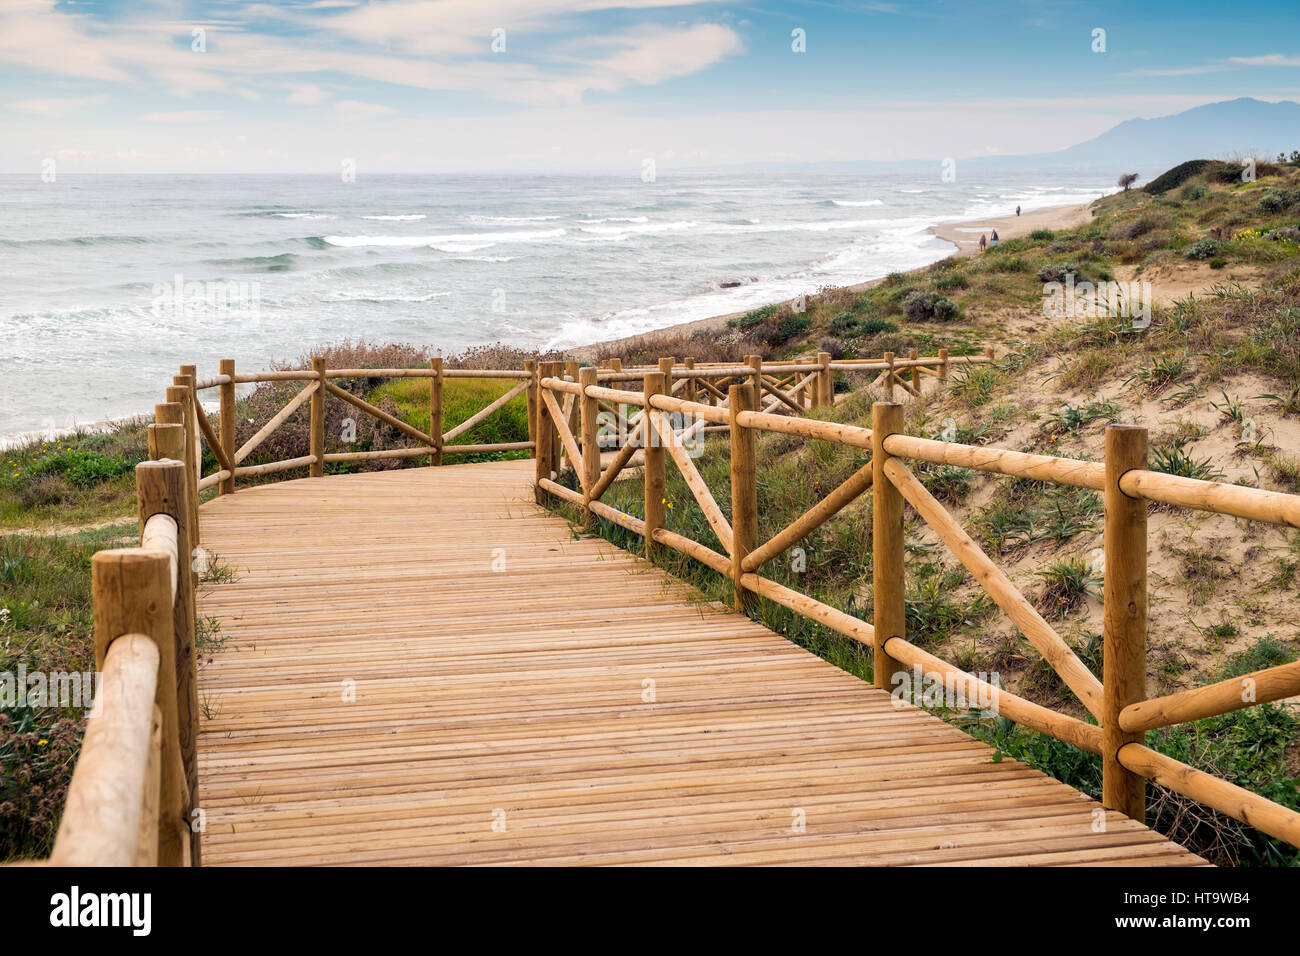 Woden walkway in natural park of Cabopino, Marbella, Costa del Sol, Málaga province, Andalusia, Spain Stock Photo